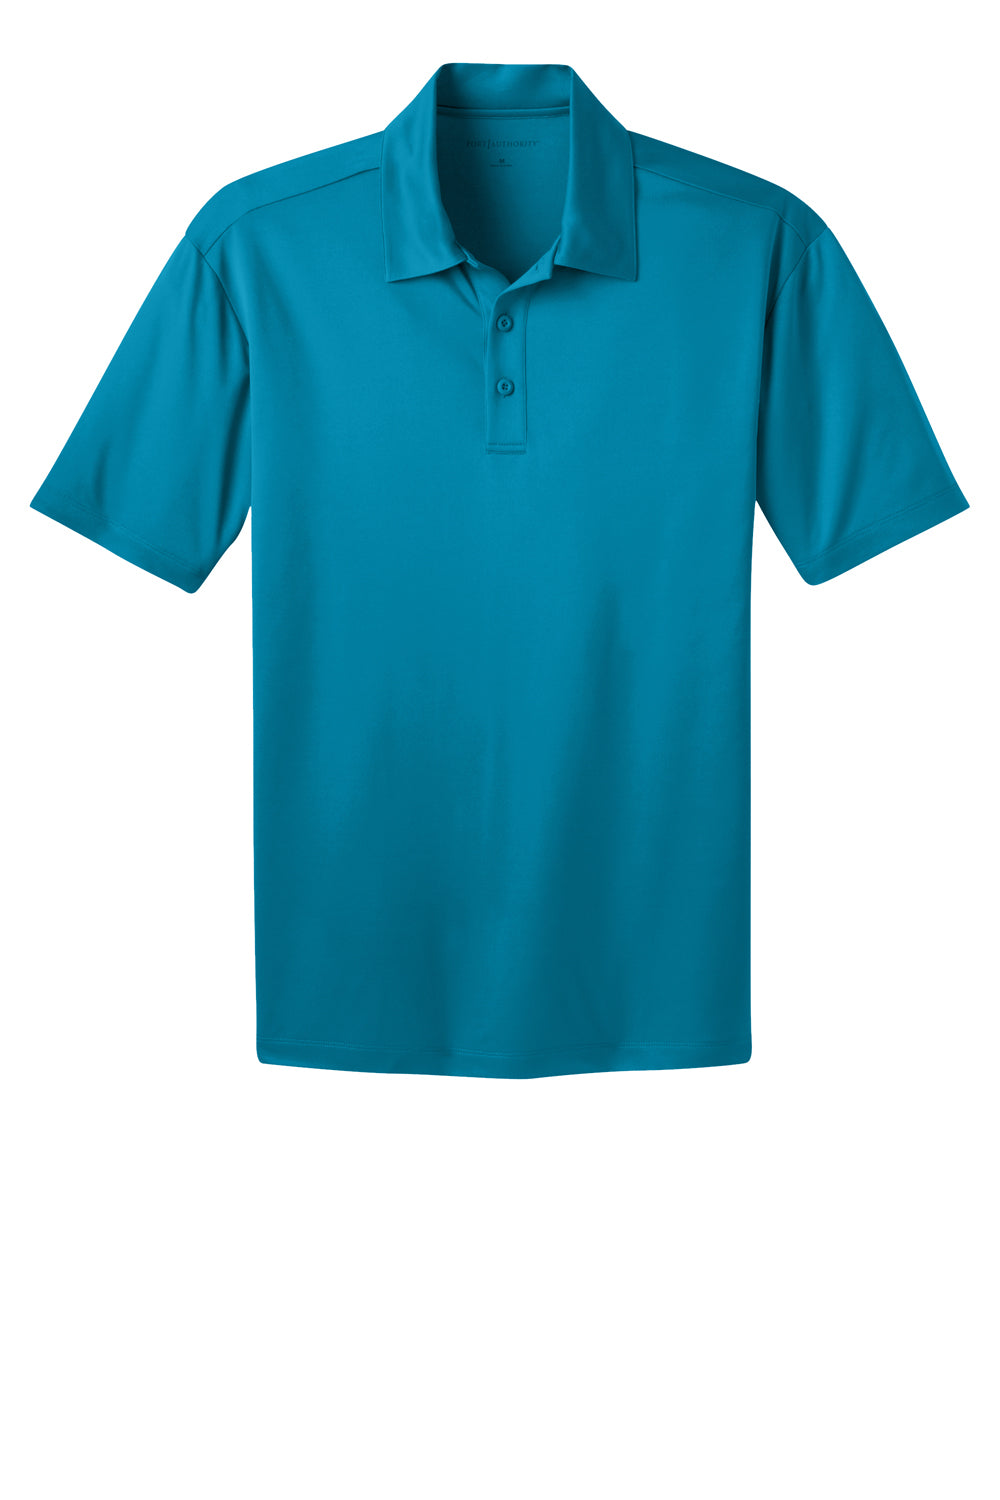 Port Authority Mens Silk Touch Performance Moisture Wicking Short Sleeve Polo Shirt Parcel Blue Flat Front